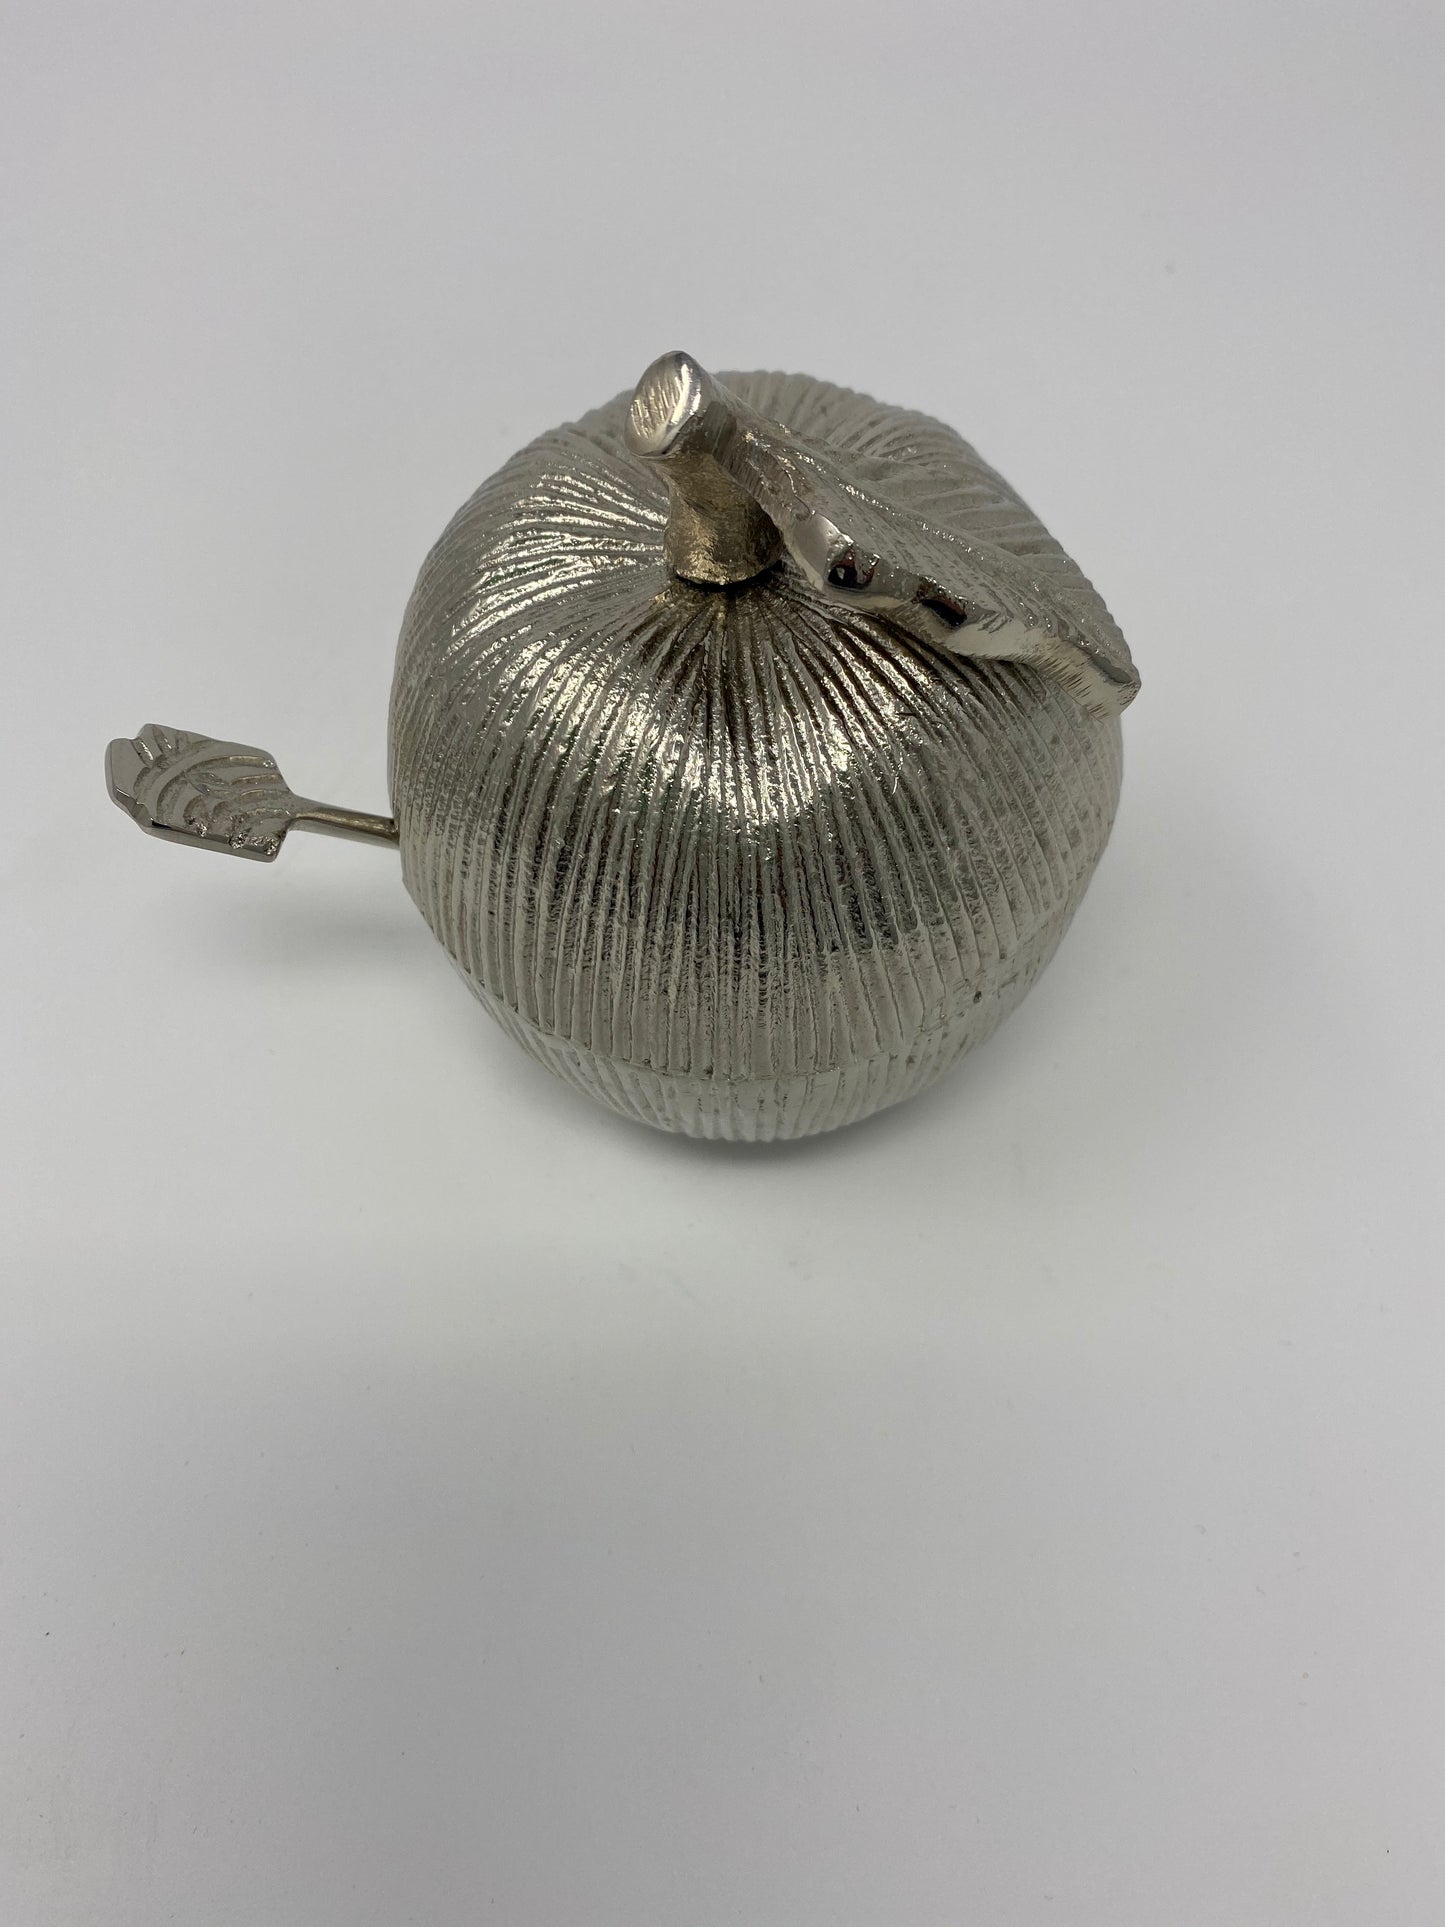 Silver Apple Shaped Dish with Removable Honey Jar and Spoon [Large]